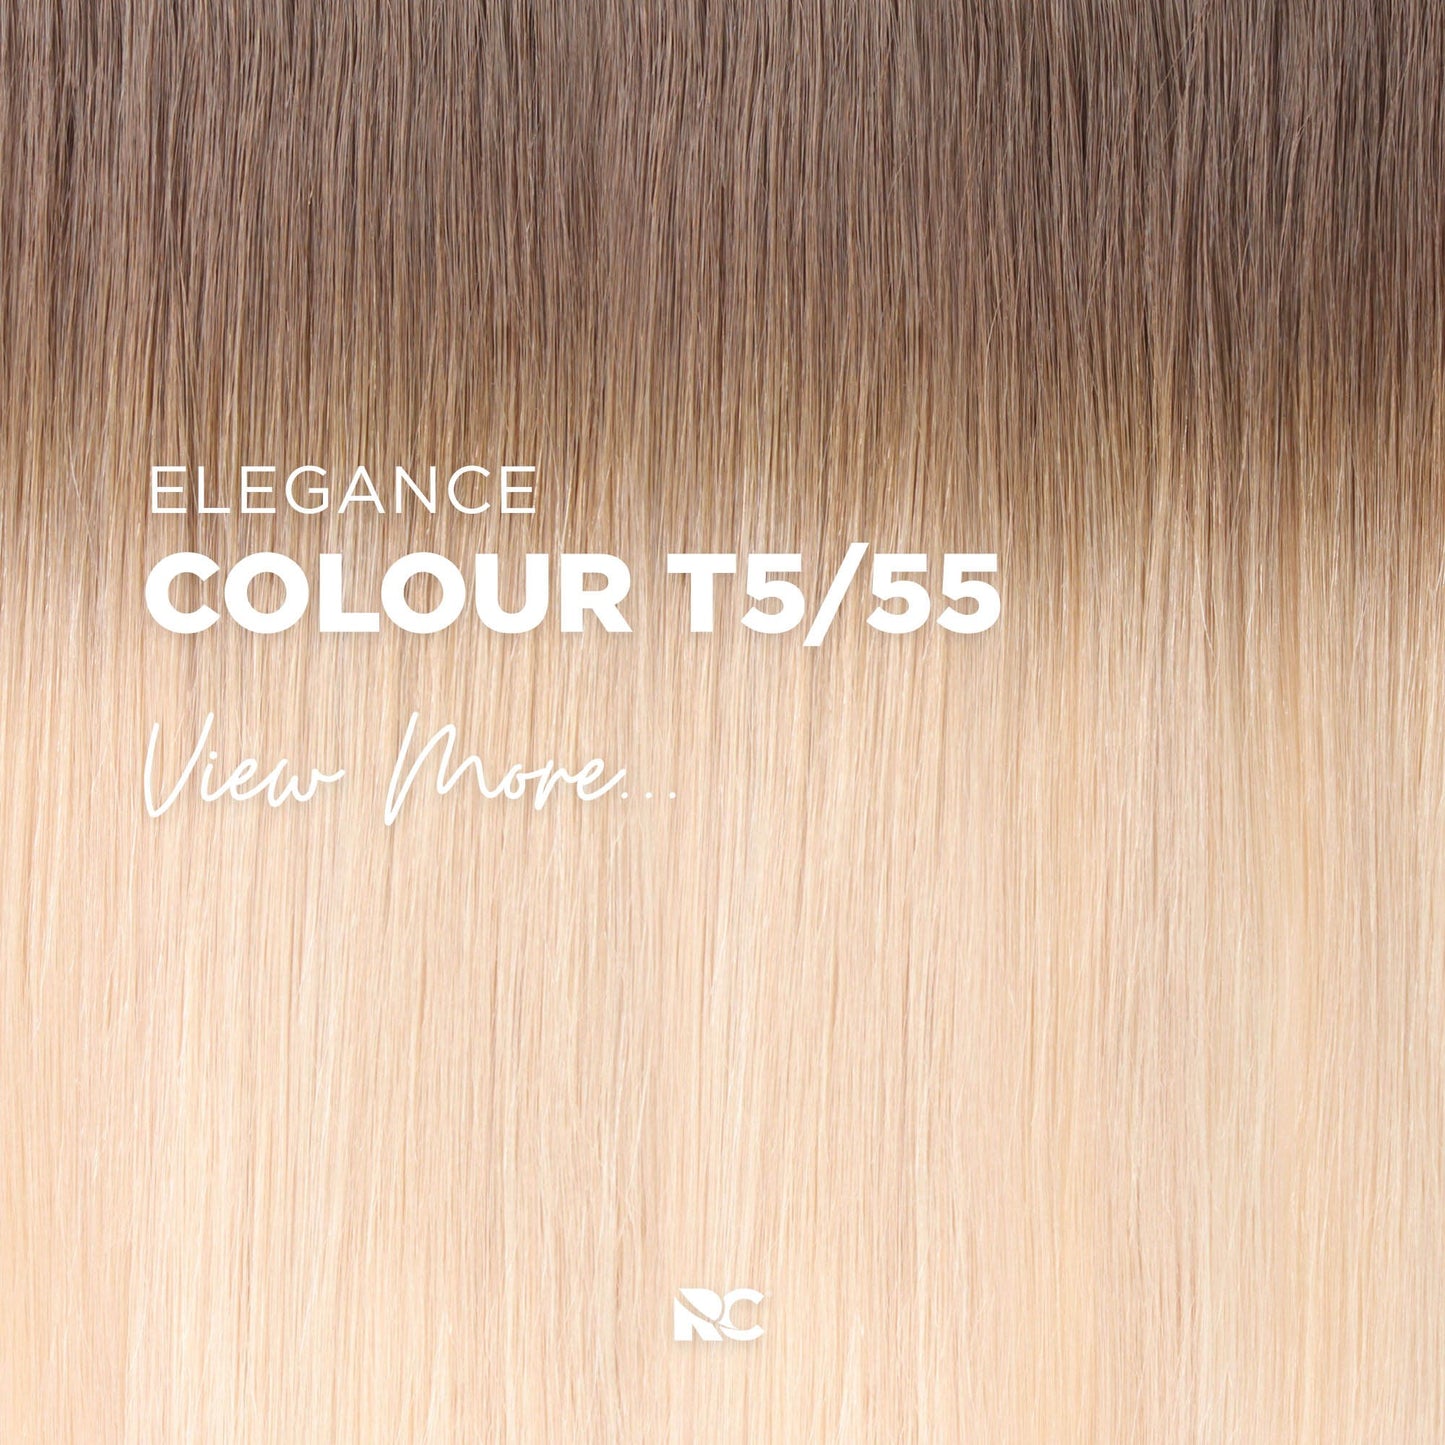 MINI TIPS®- ROOT STRETCH, OMBRE & DIP DYE